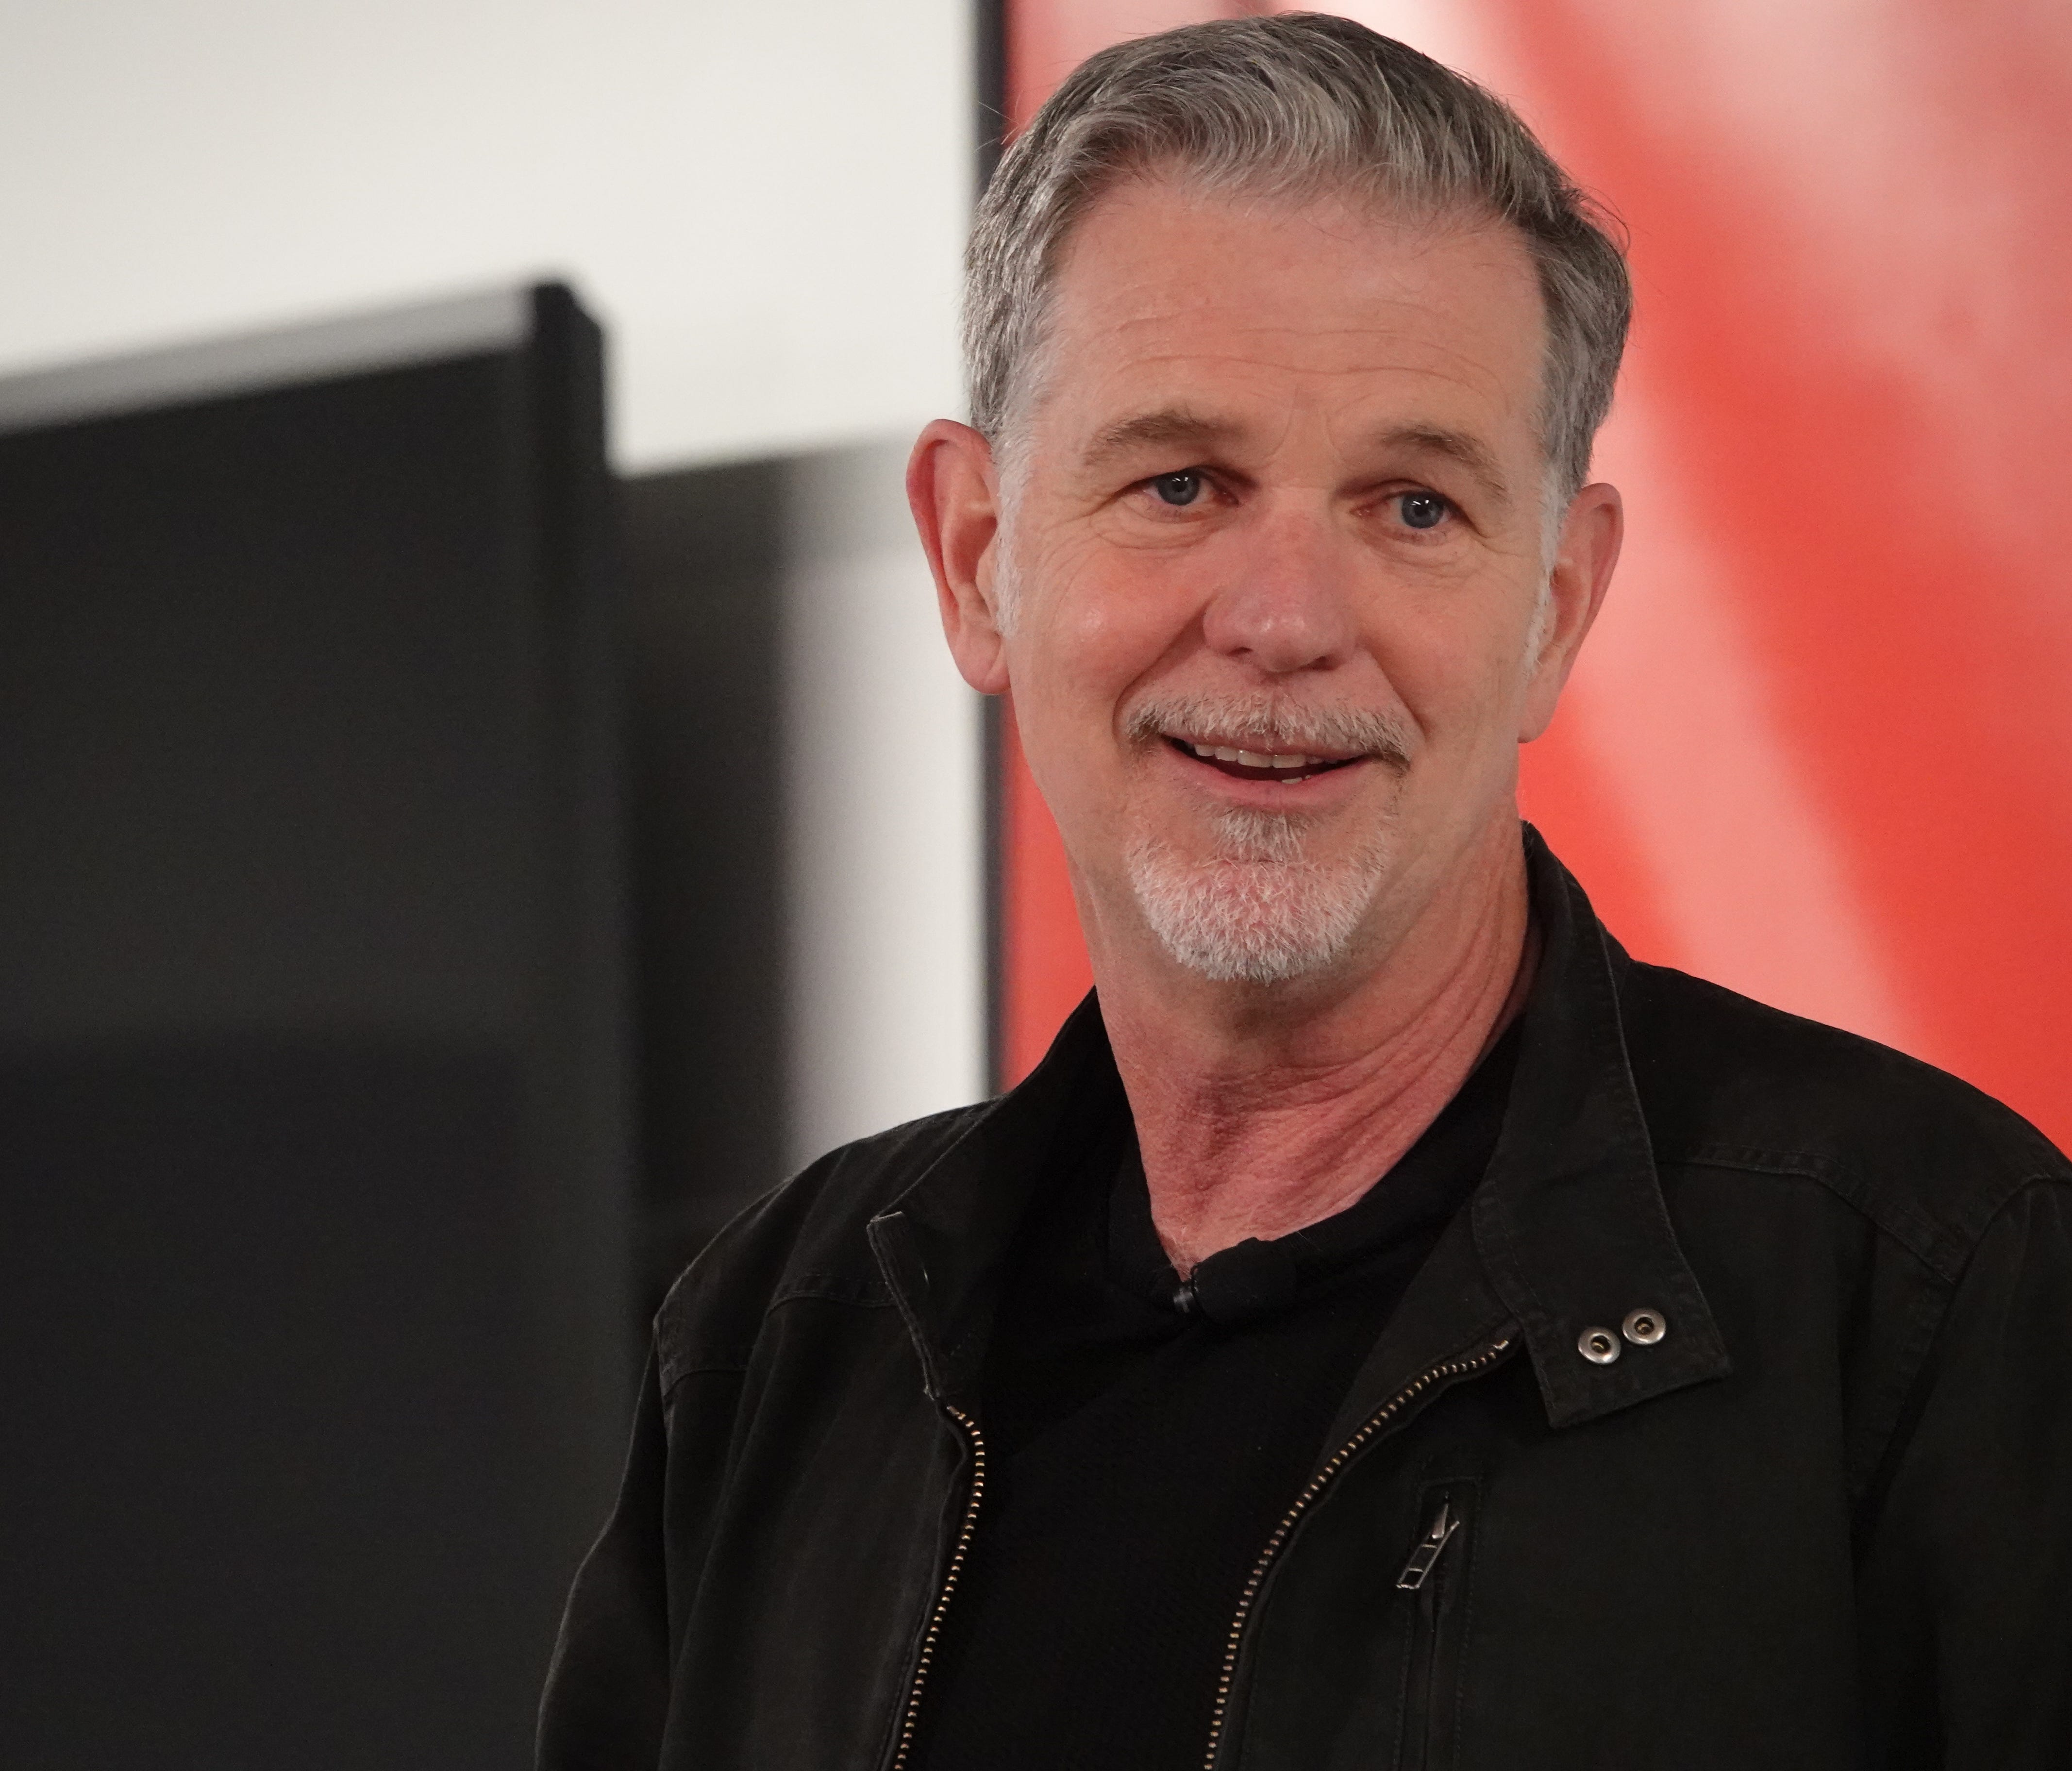 Netflix CEO Reed Hastings speaks at the company's offices in Hollywood